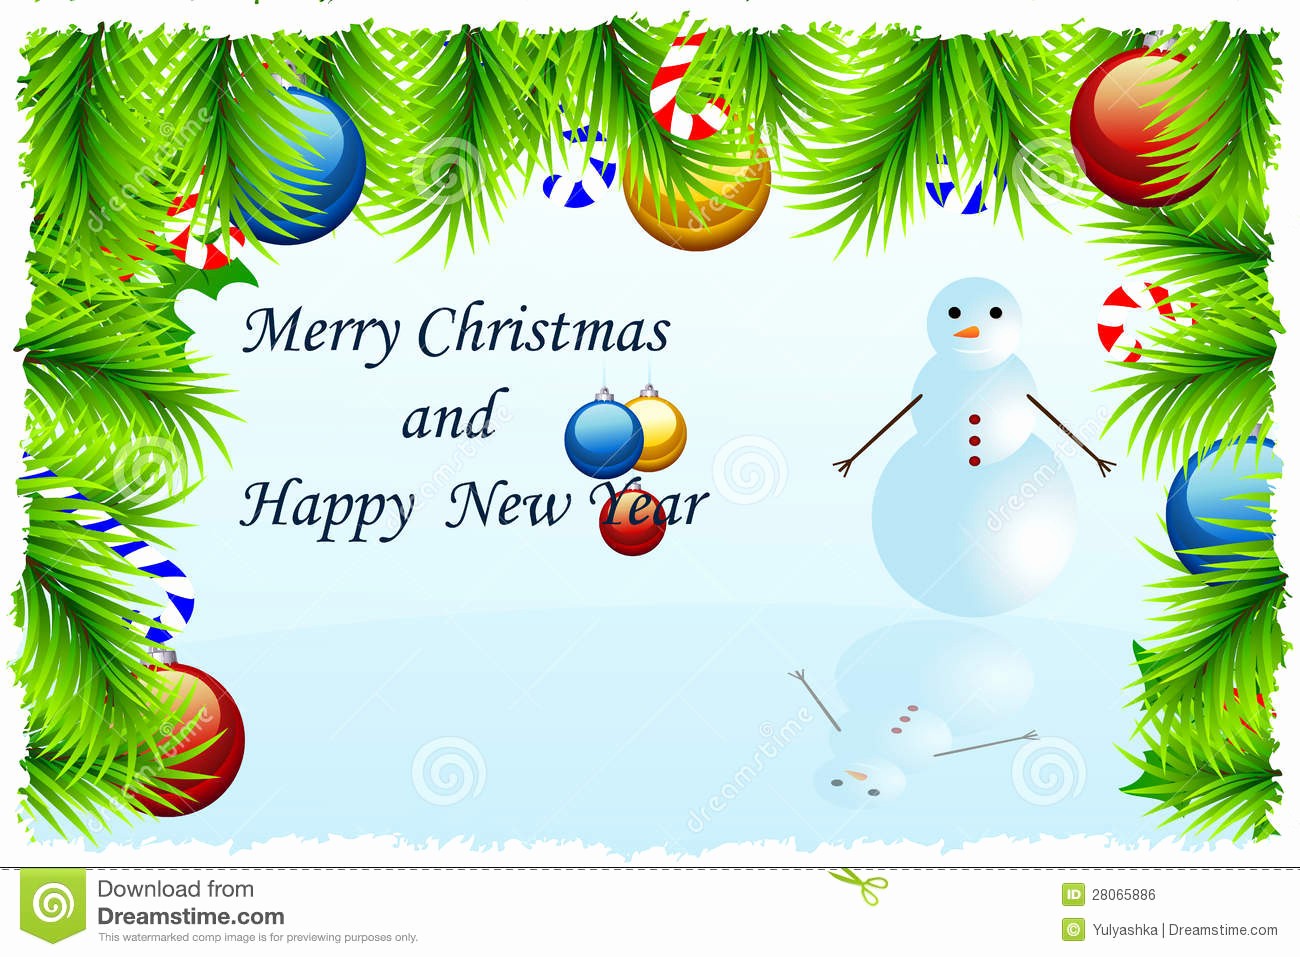 Templates for Cards Free Downloads Luxury Christmas Greeting Card Template for Free Download